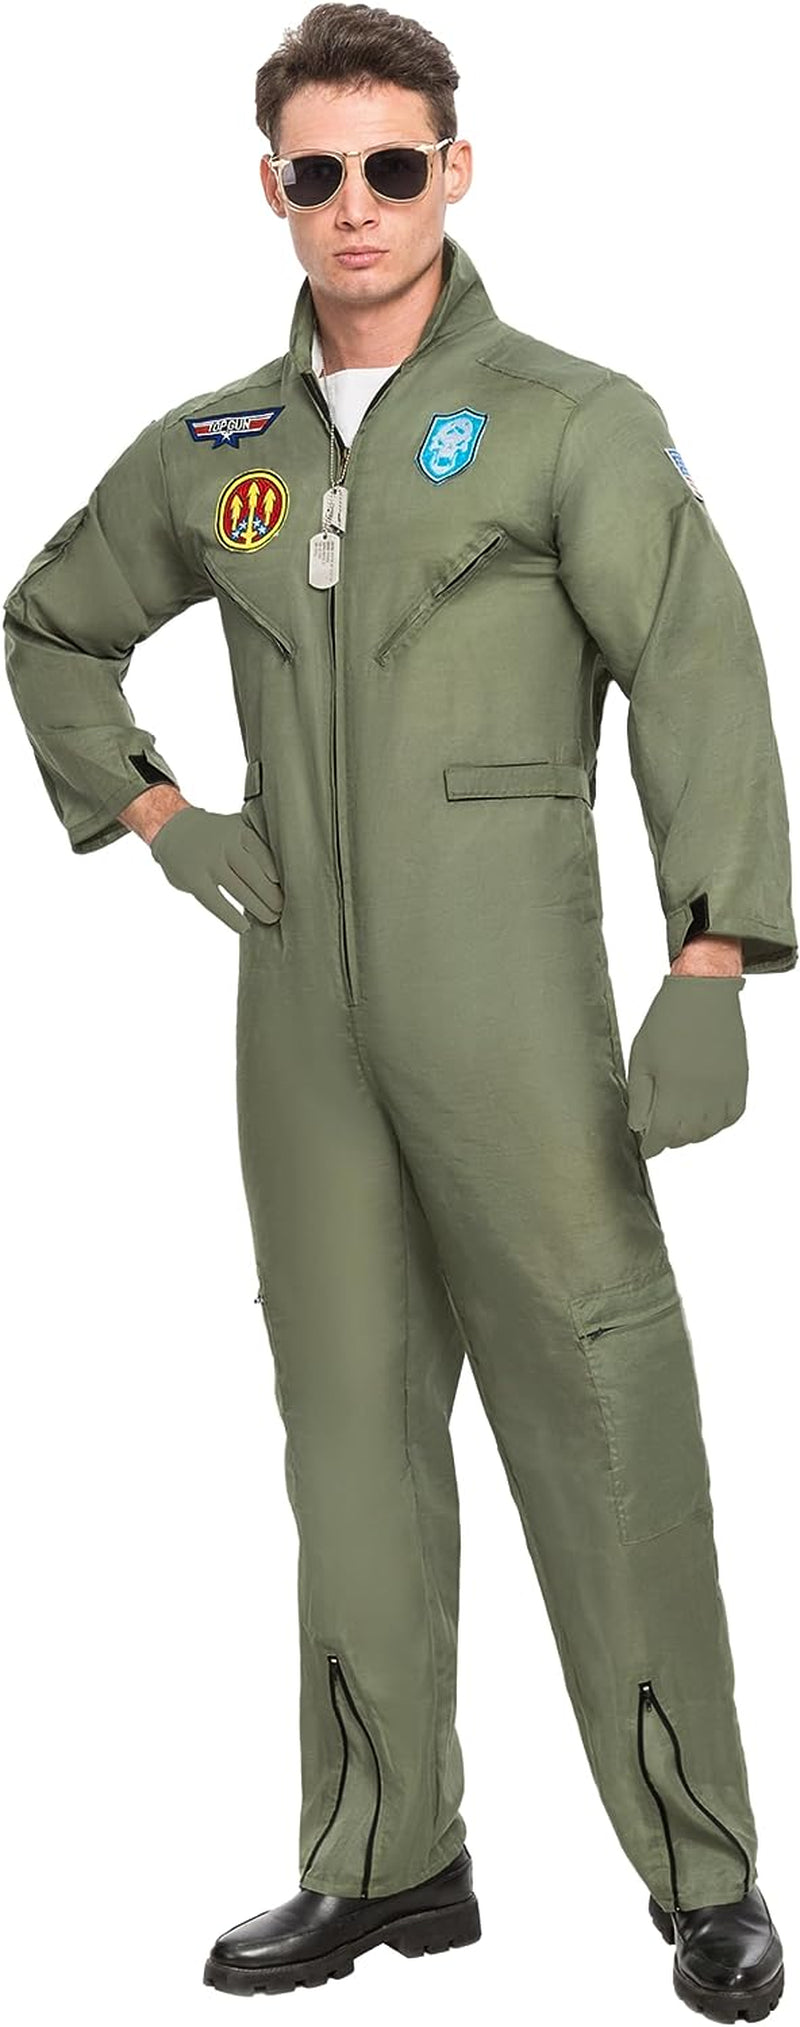 Spooktacular Creations Men’S Flight Pilot Adult Costume with Accessory for Halloween Party